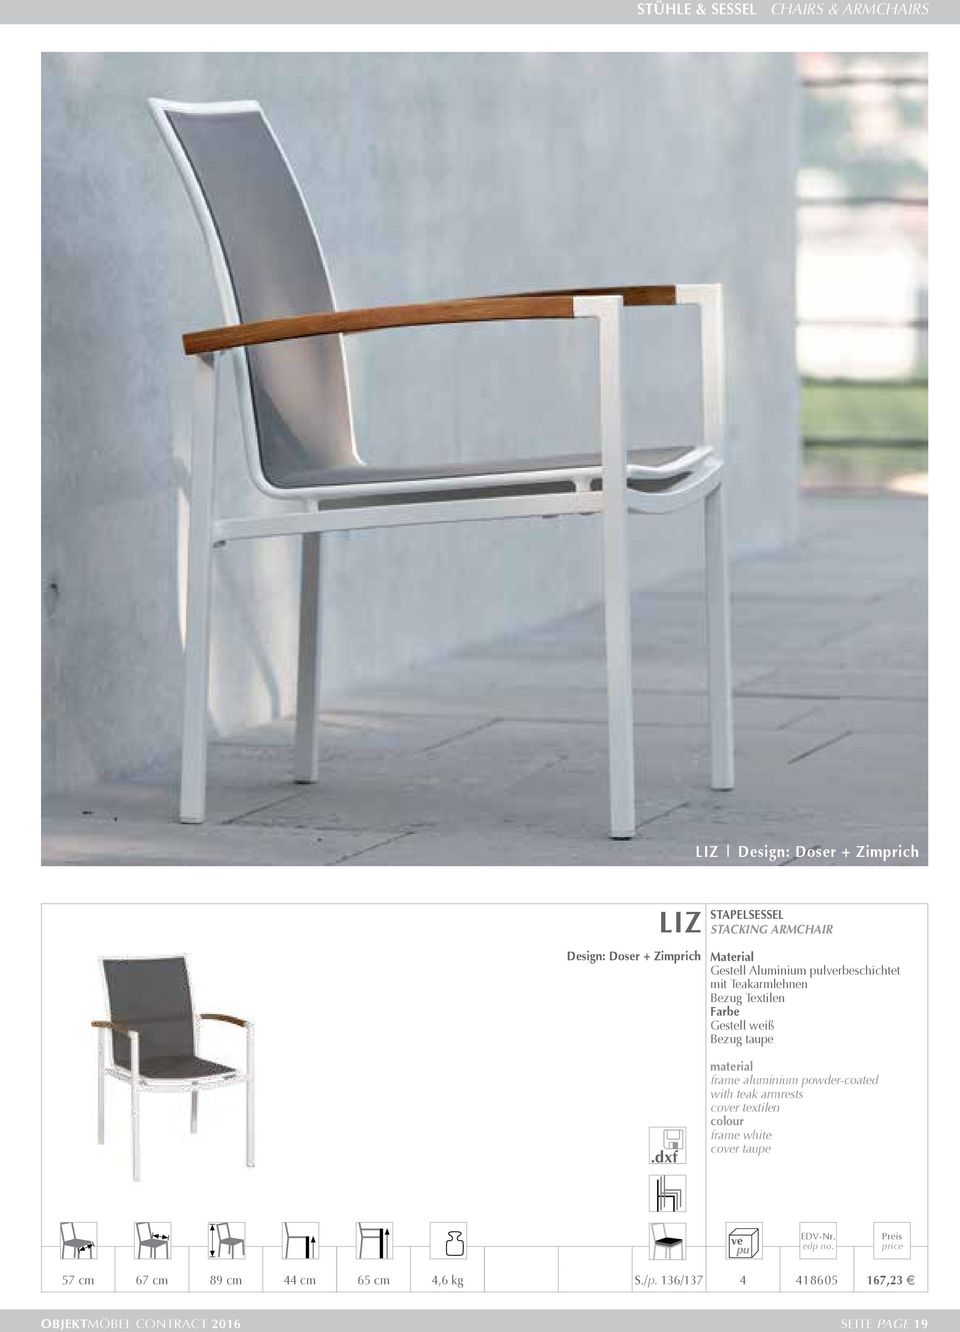 Gestell weiß Bezug taupe frame aluminium powder-coated with teak armrests cover textilen frame white